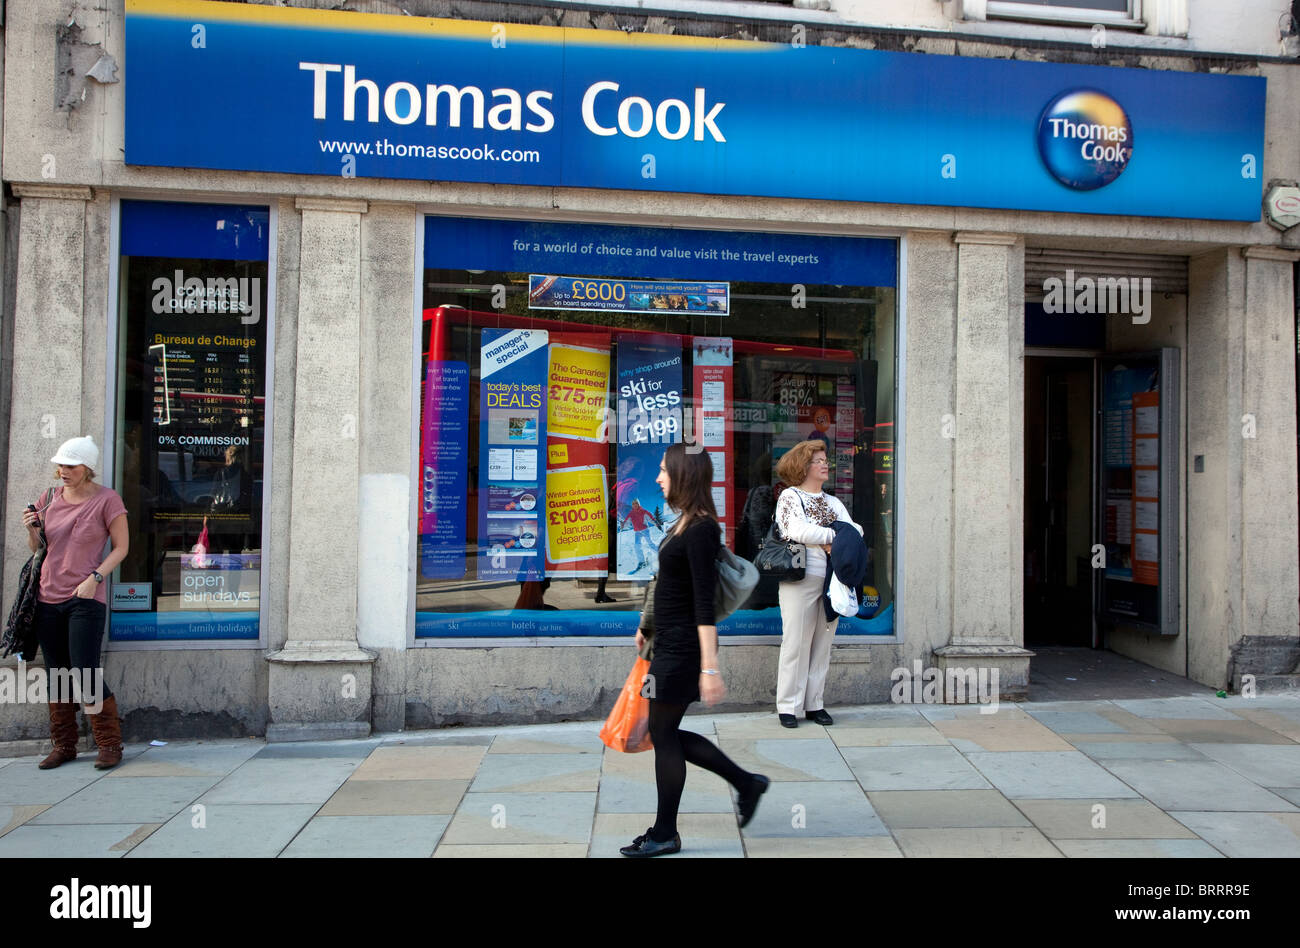 Thomas Cook and Co-Operative travel agents to merge, London Stock Photo